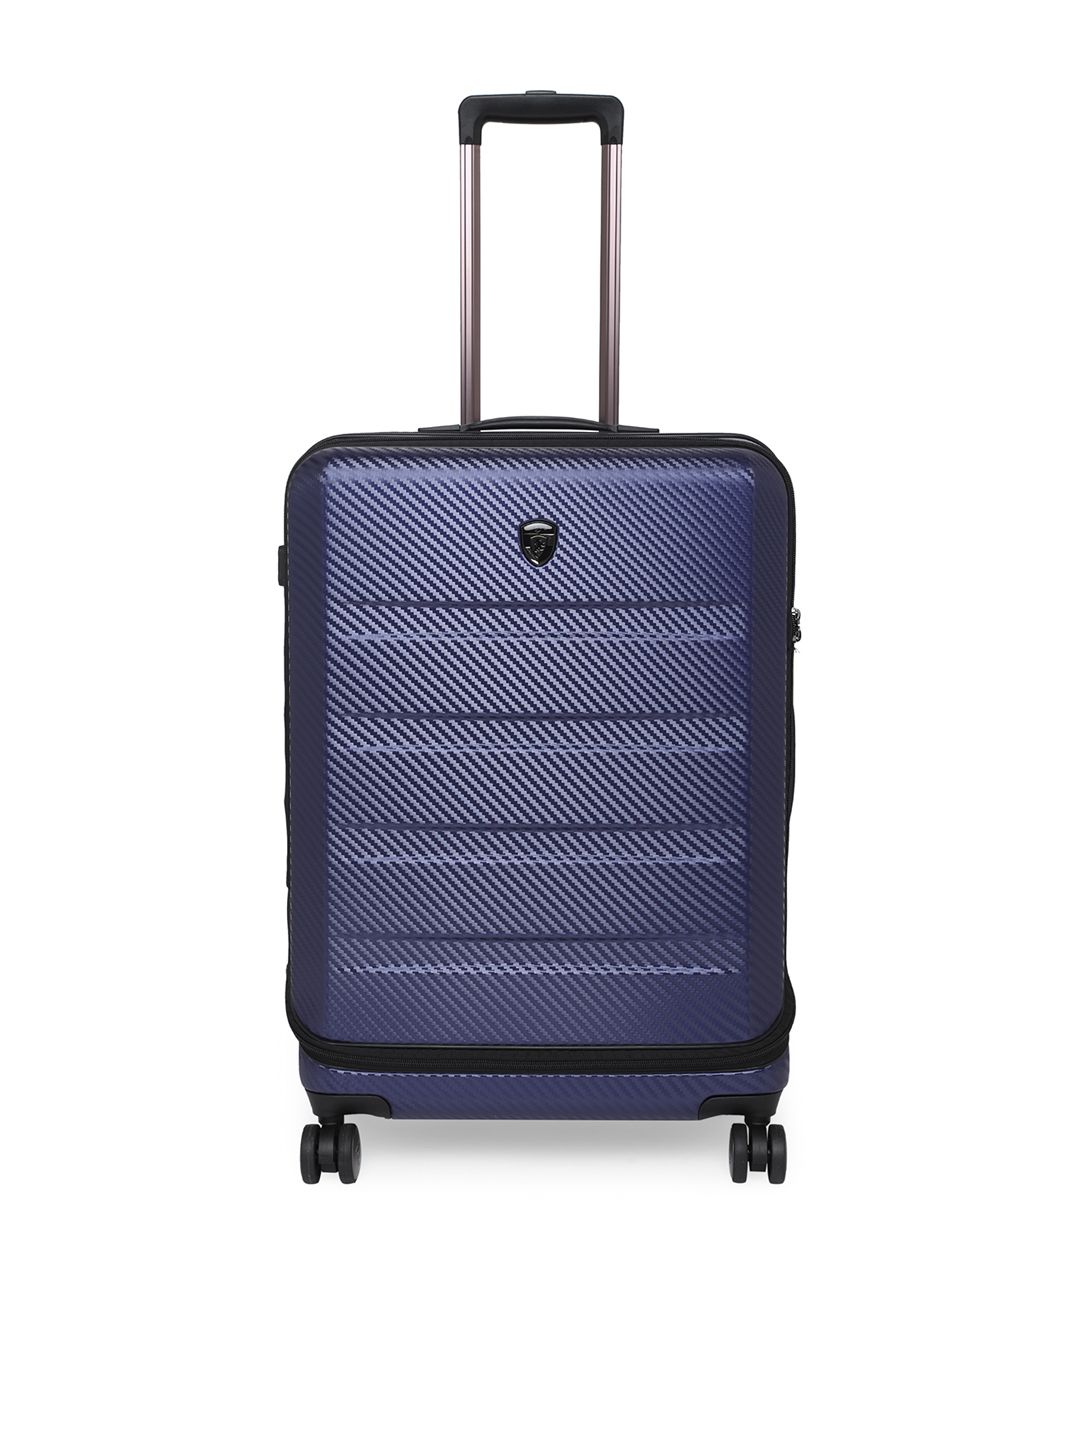 Heys Navy Blue Textured Hard-Sided Medium Trolley Suitcase Price in India